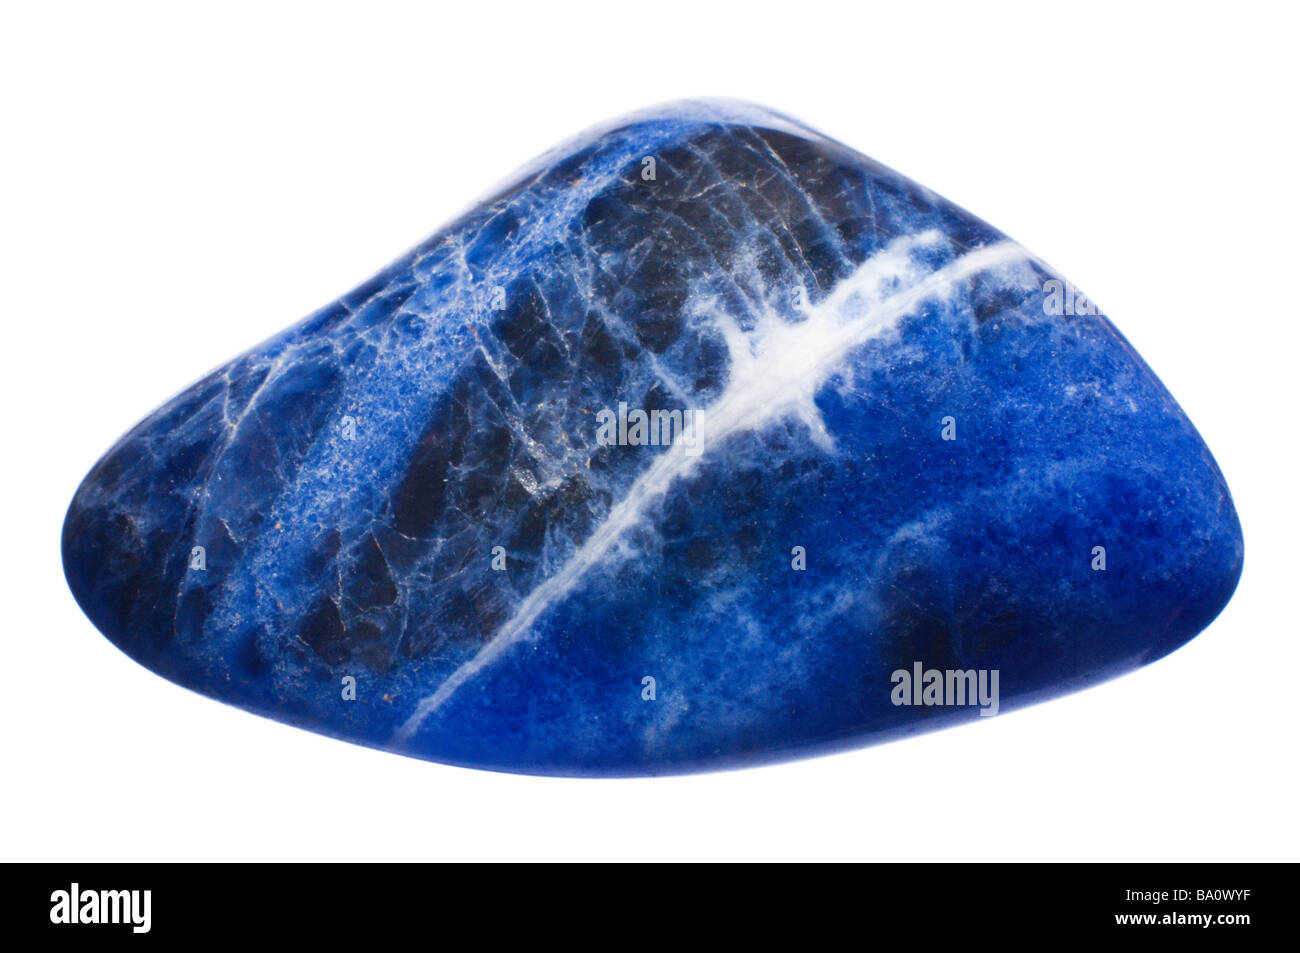 Sodalite tumblestone (silicate occuring as dodecahedral crystals) Stock Photo